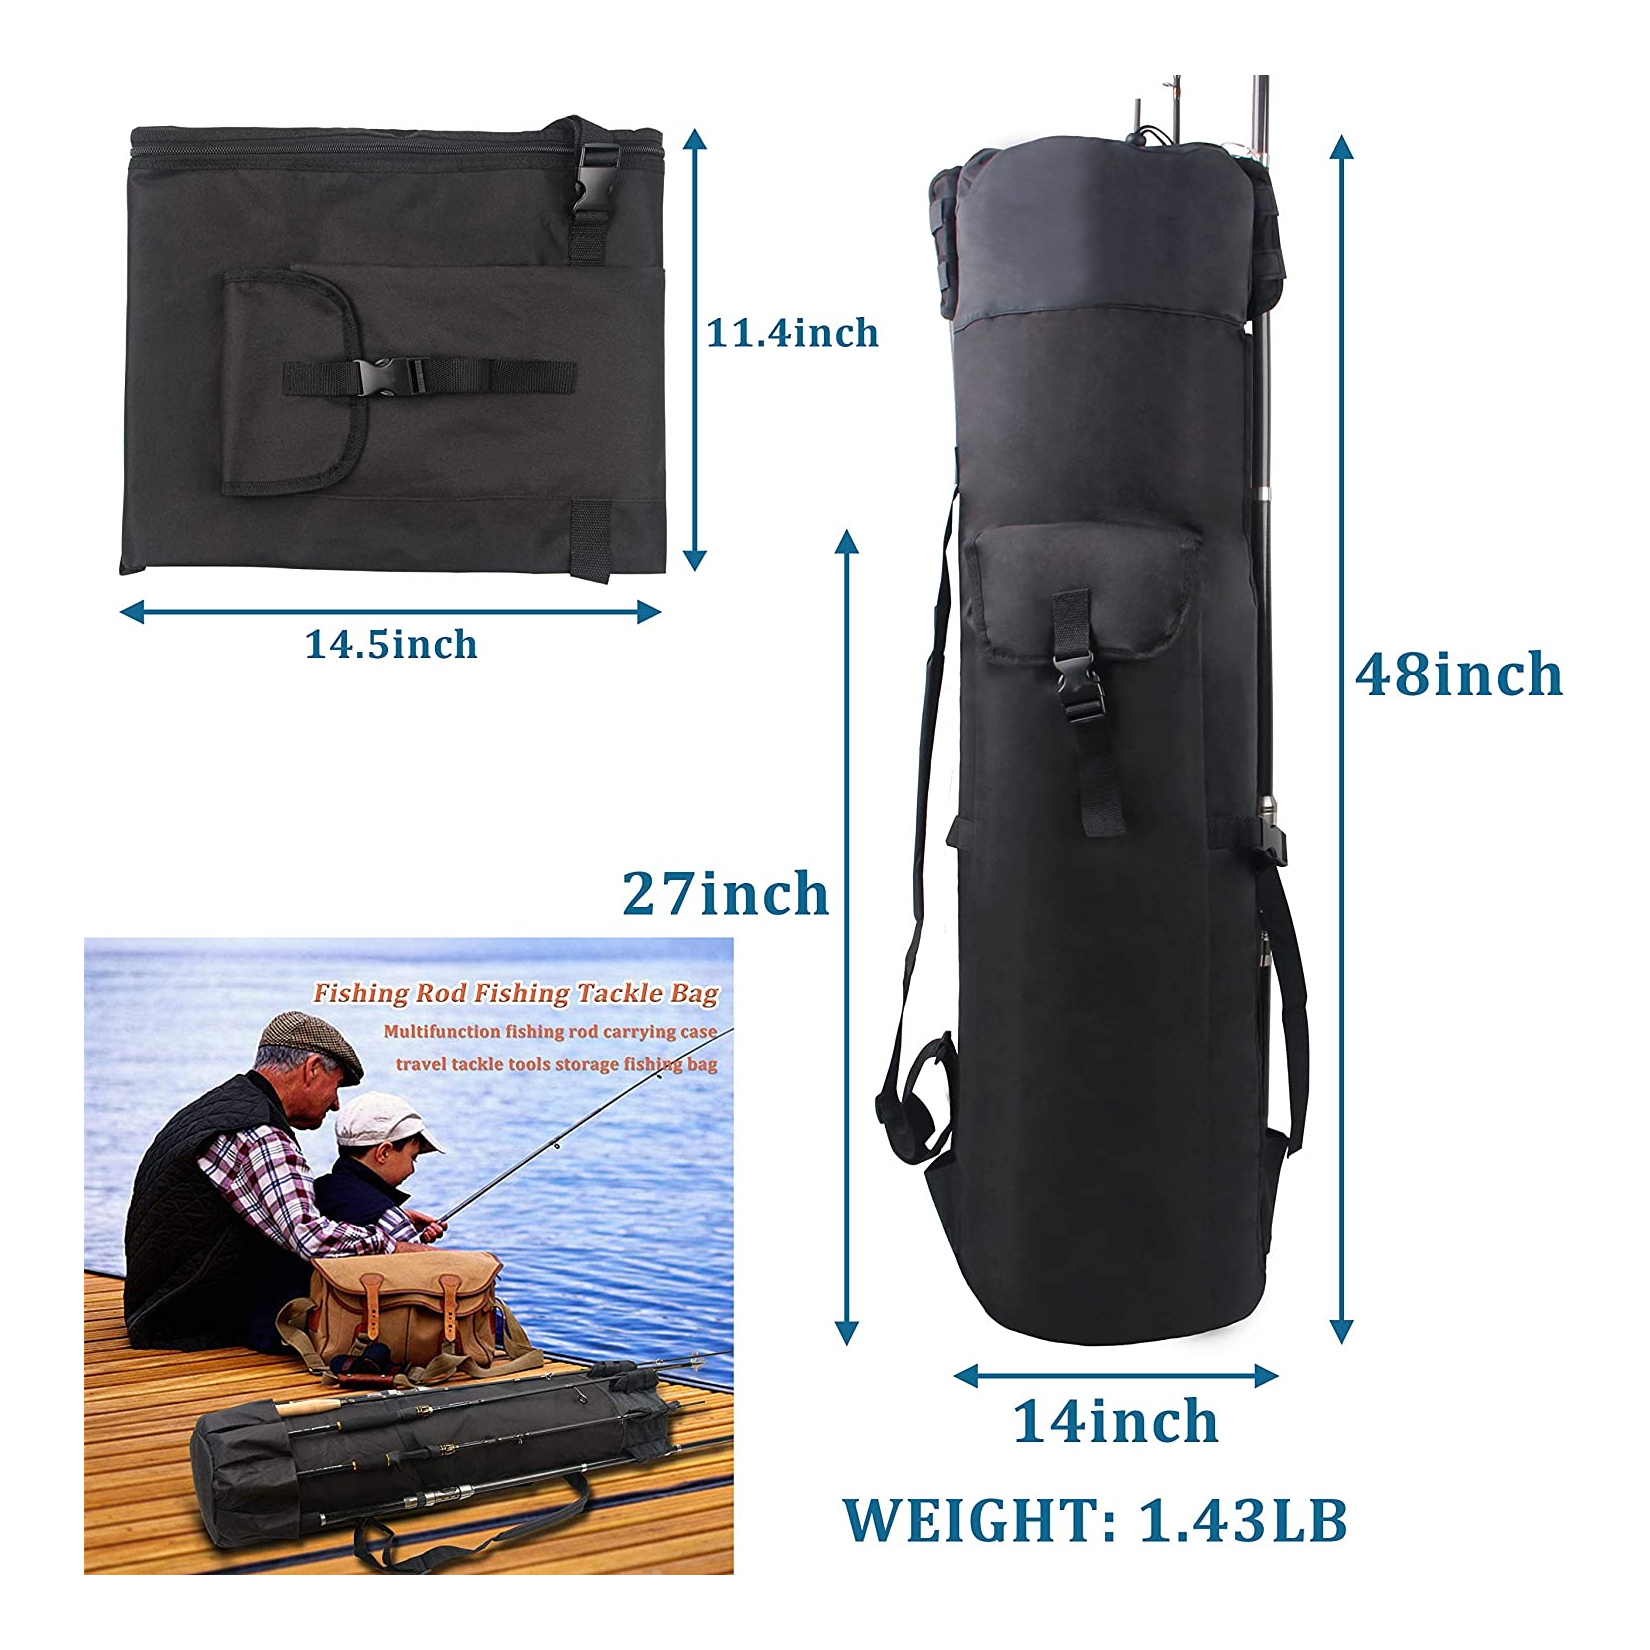 https://backpacks.global/compare/wp-content/uploads/OROOTL-Fishing-Rod-Bag-Pole-Holder-Carrier-Dimension-View.png